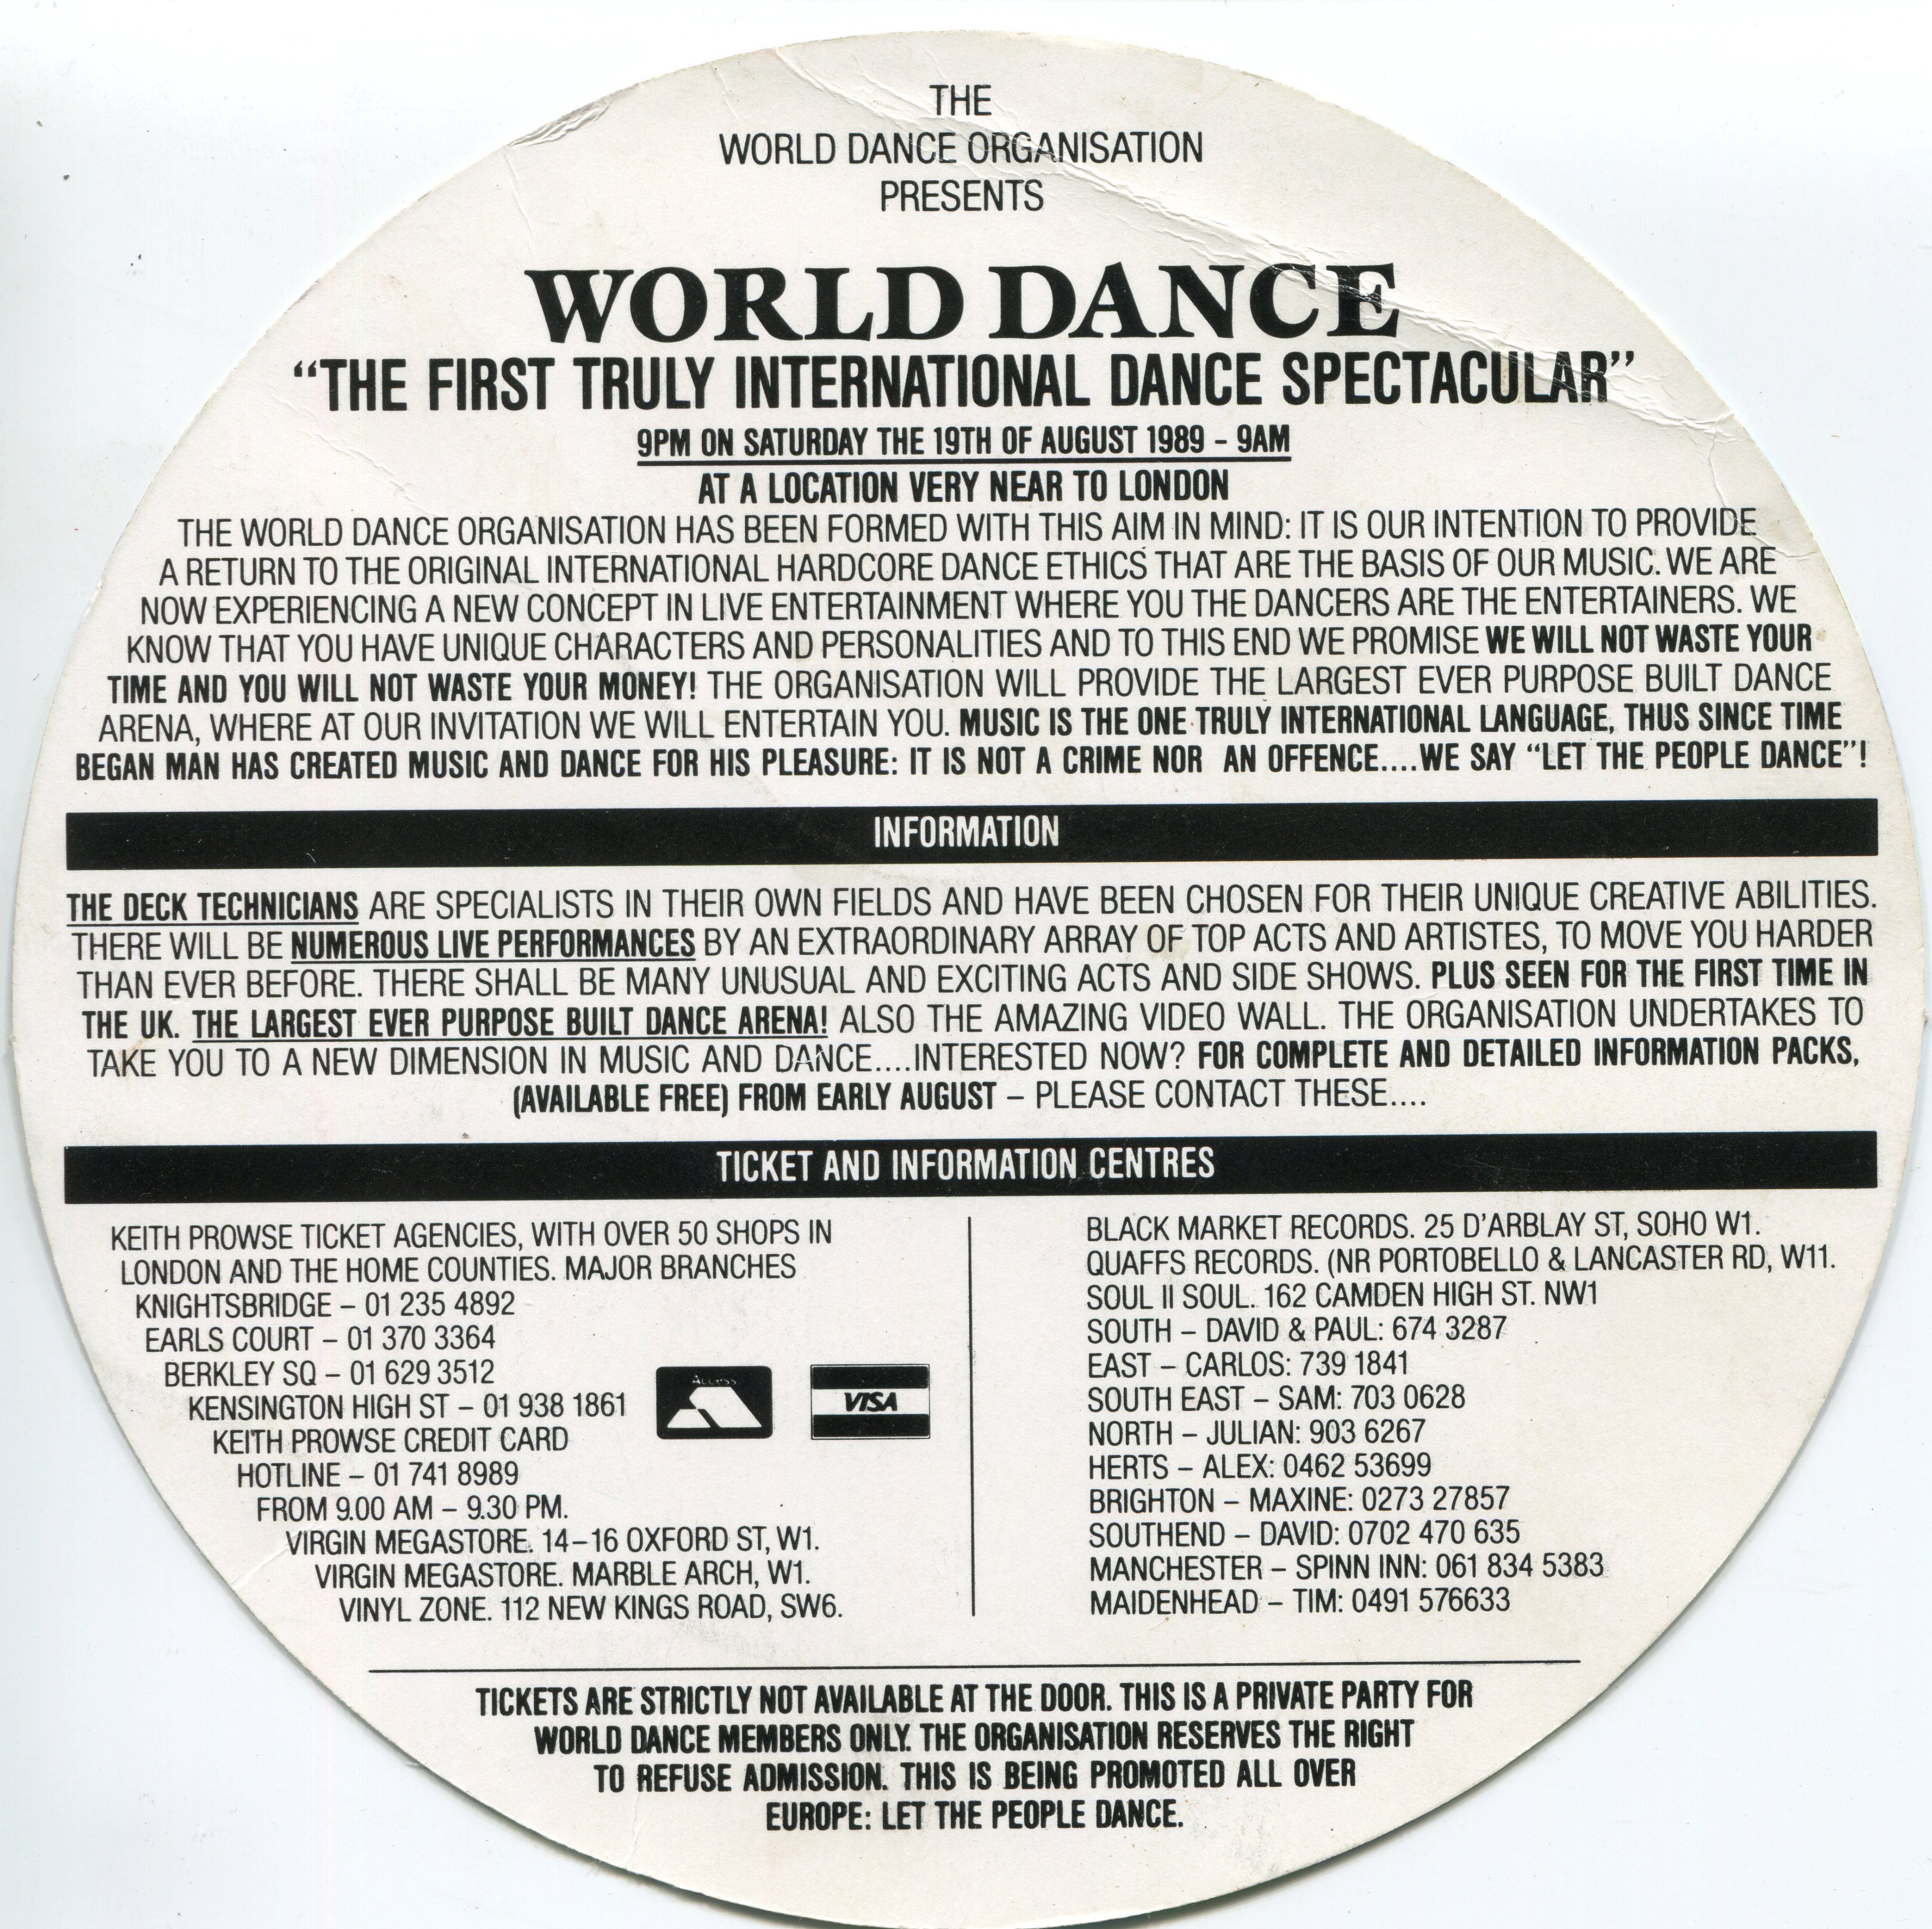 Rave flyers Uk on Twitter: "WORLD DANCE Saturday 19th August 1989. Unspecified location close to London. Was this the 1st event of the World Dance org? Let the people dance.... https://t.co/qWYDvM9uVl" /